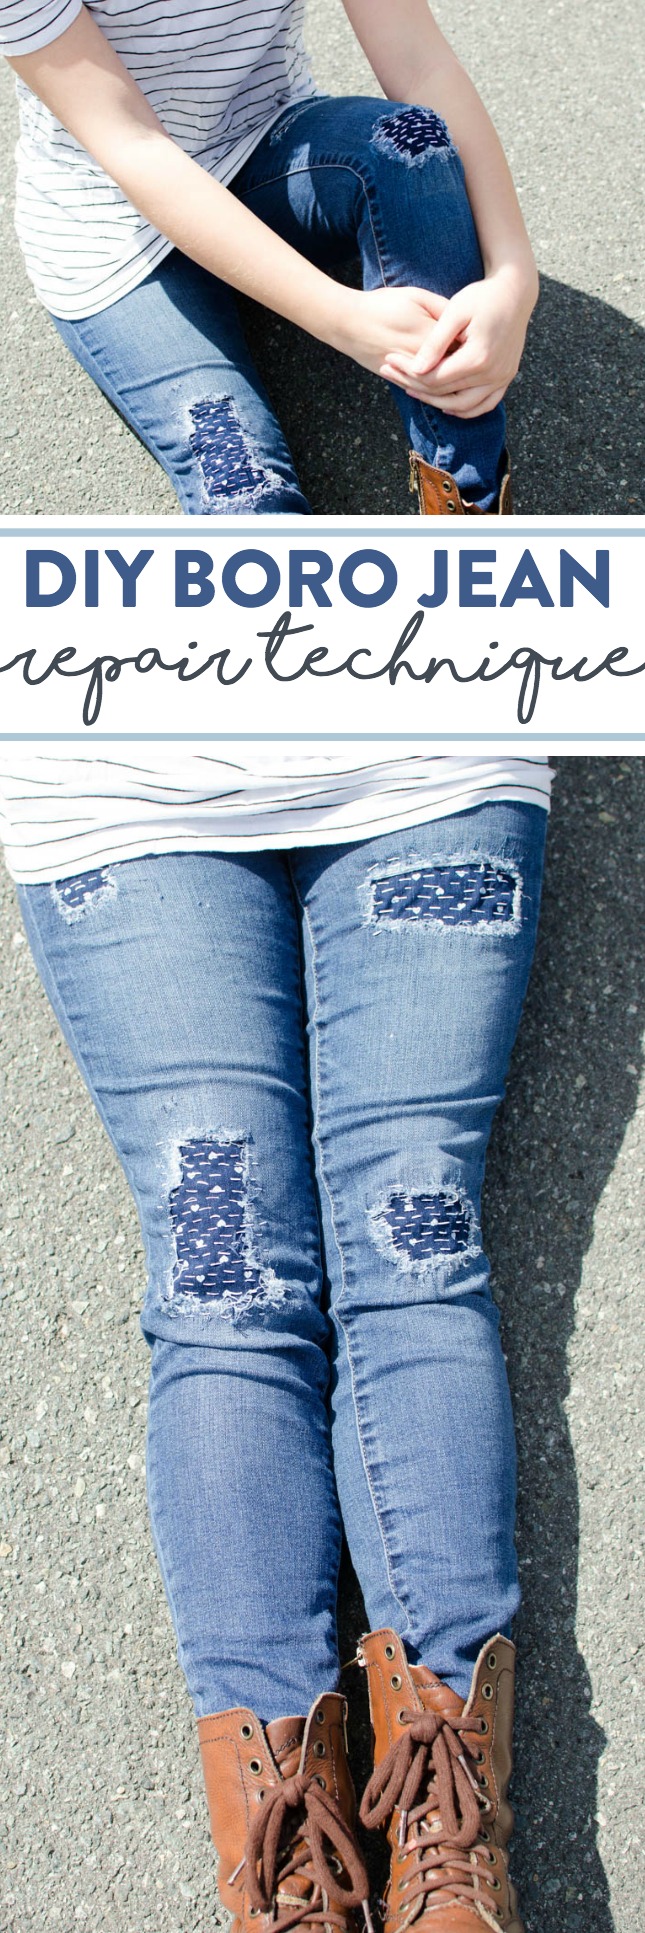 DIY Boro Jeans Repair | the new trendy way to fix up old jeans